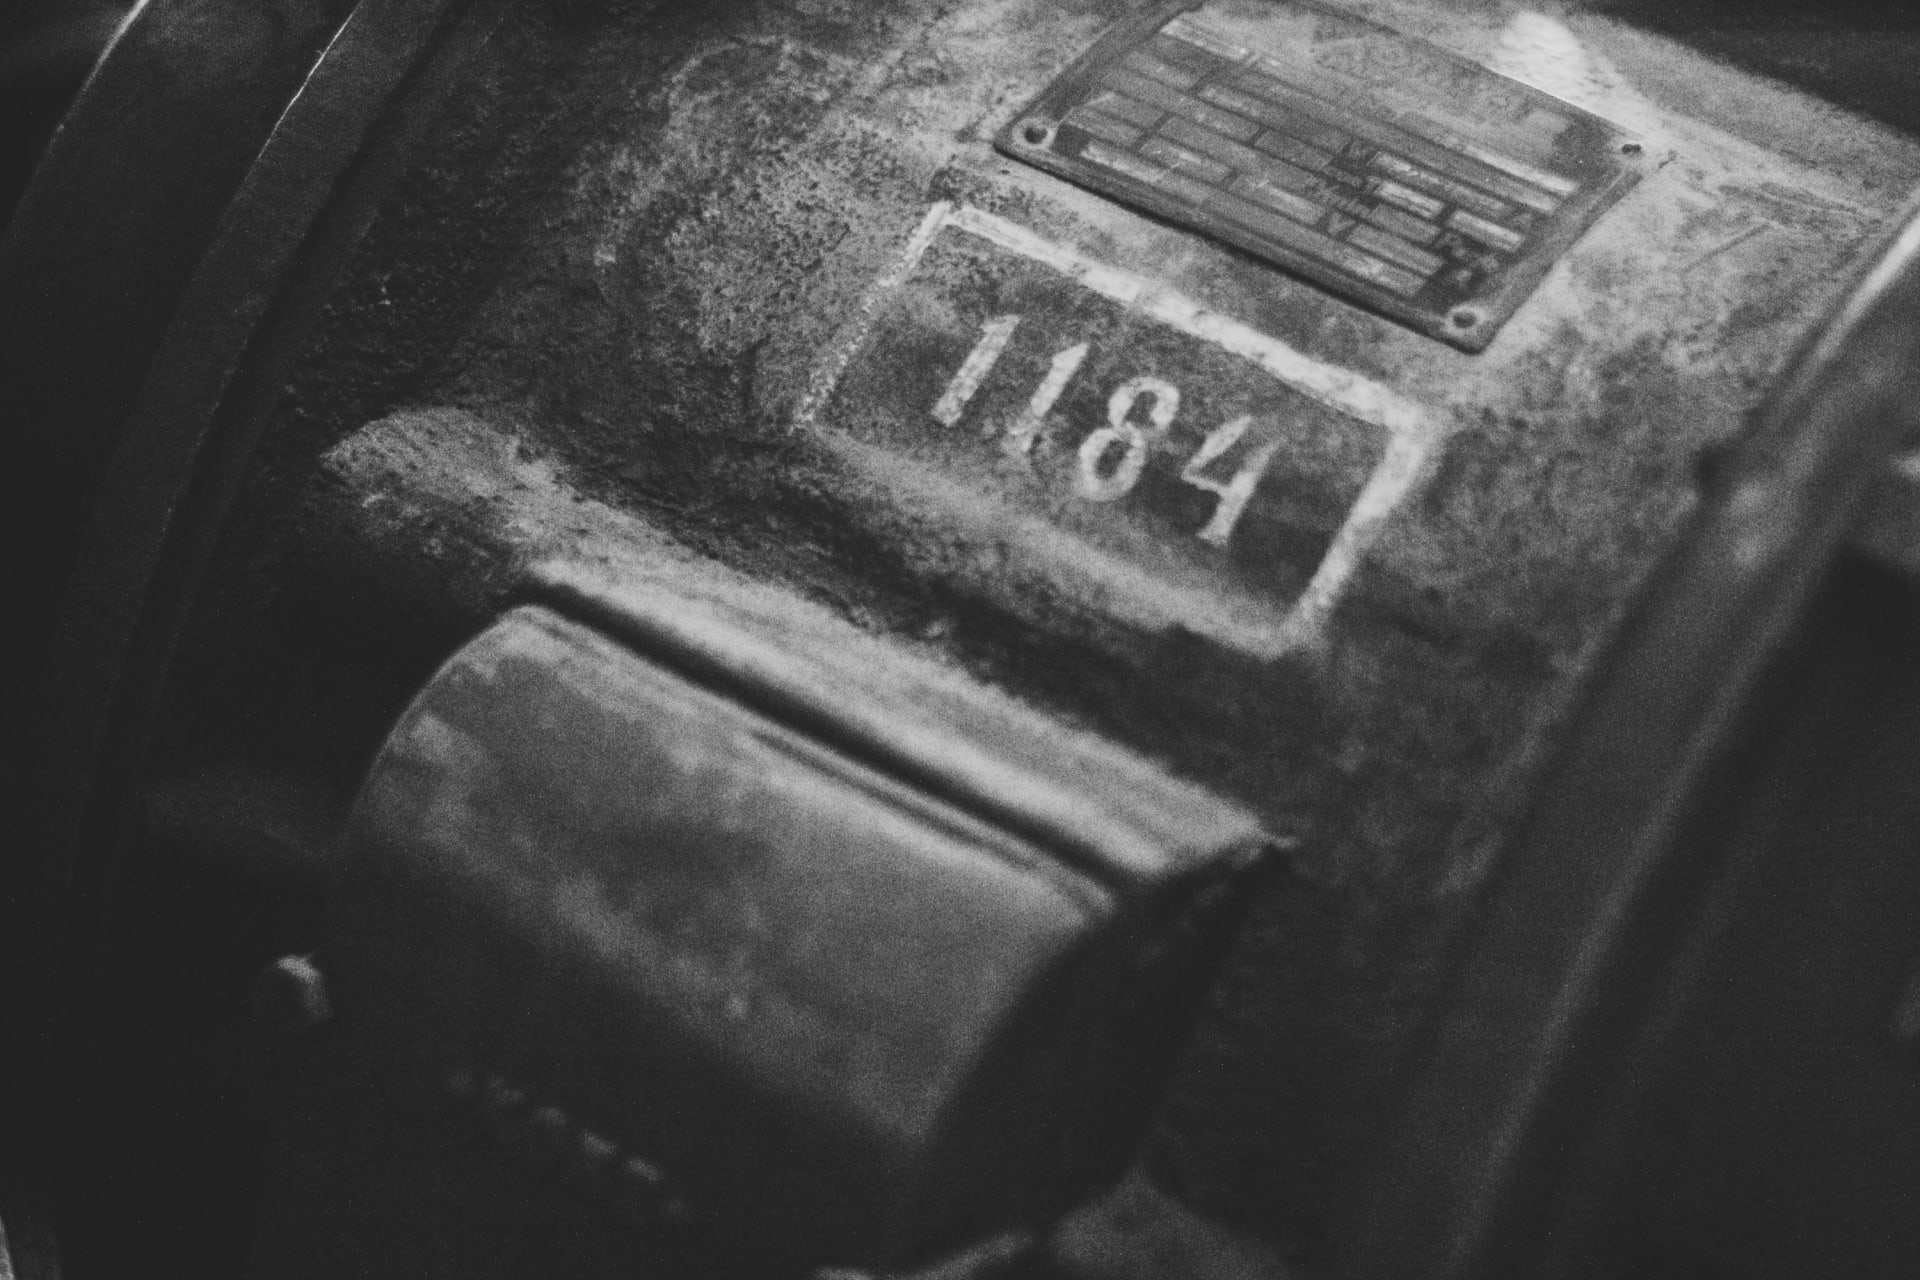 A detail on an old piece of elevator machinery with the numbers 1184